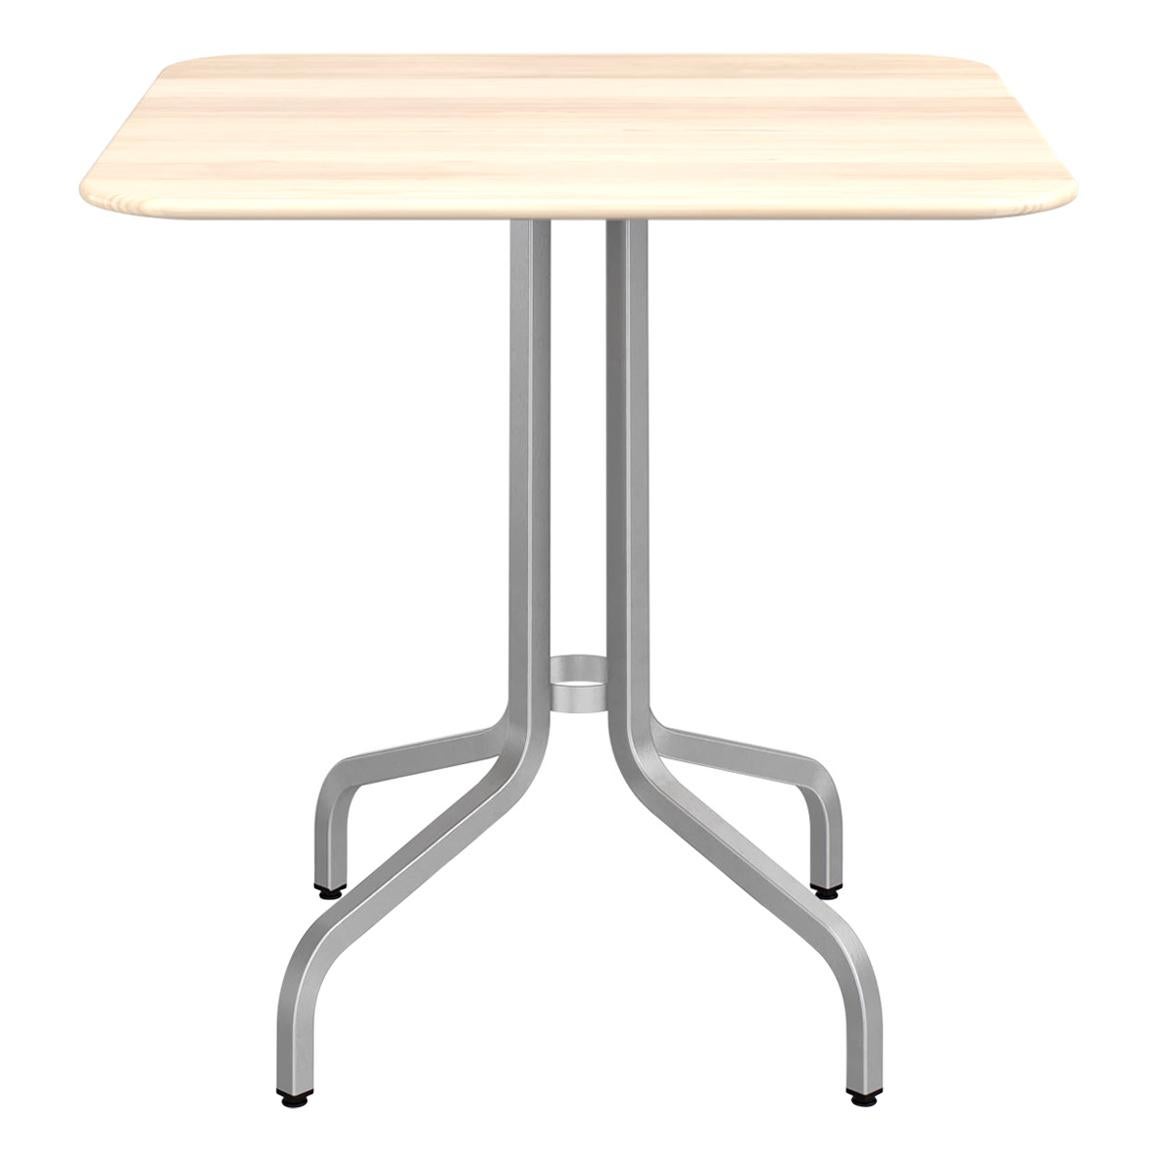 Emeco 1 Inch Medium Cafe Table with Aluminum Legs & Wood Top by Jasper Morrison For Sale